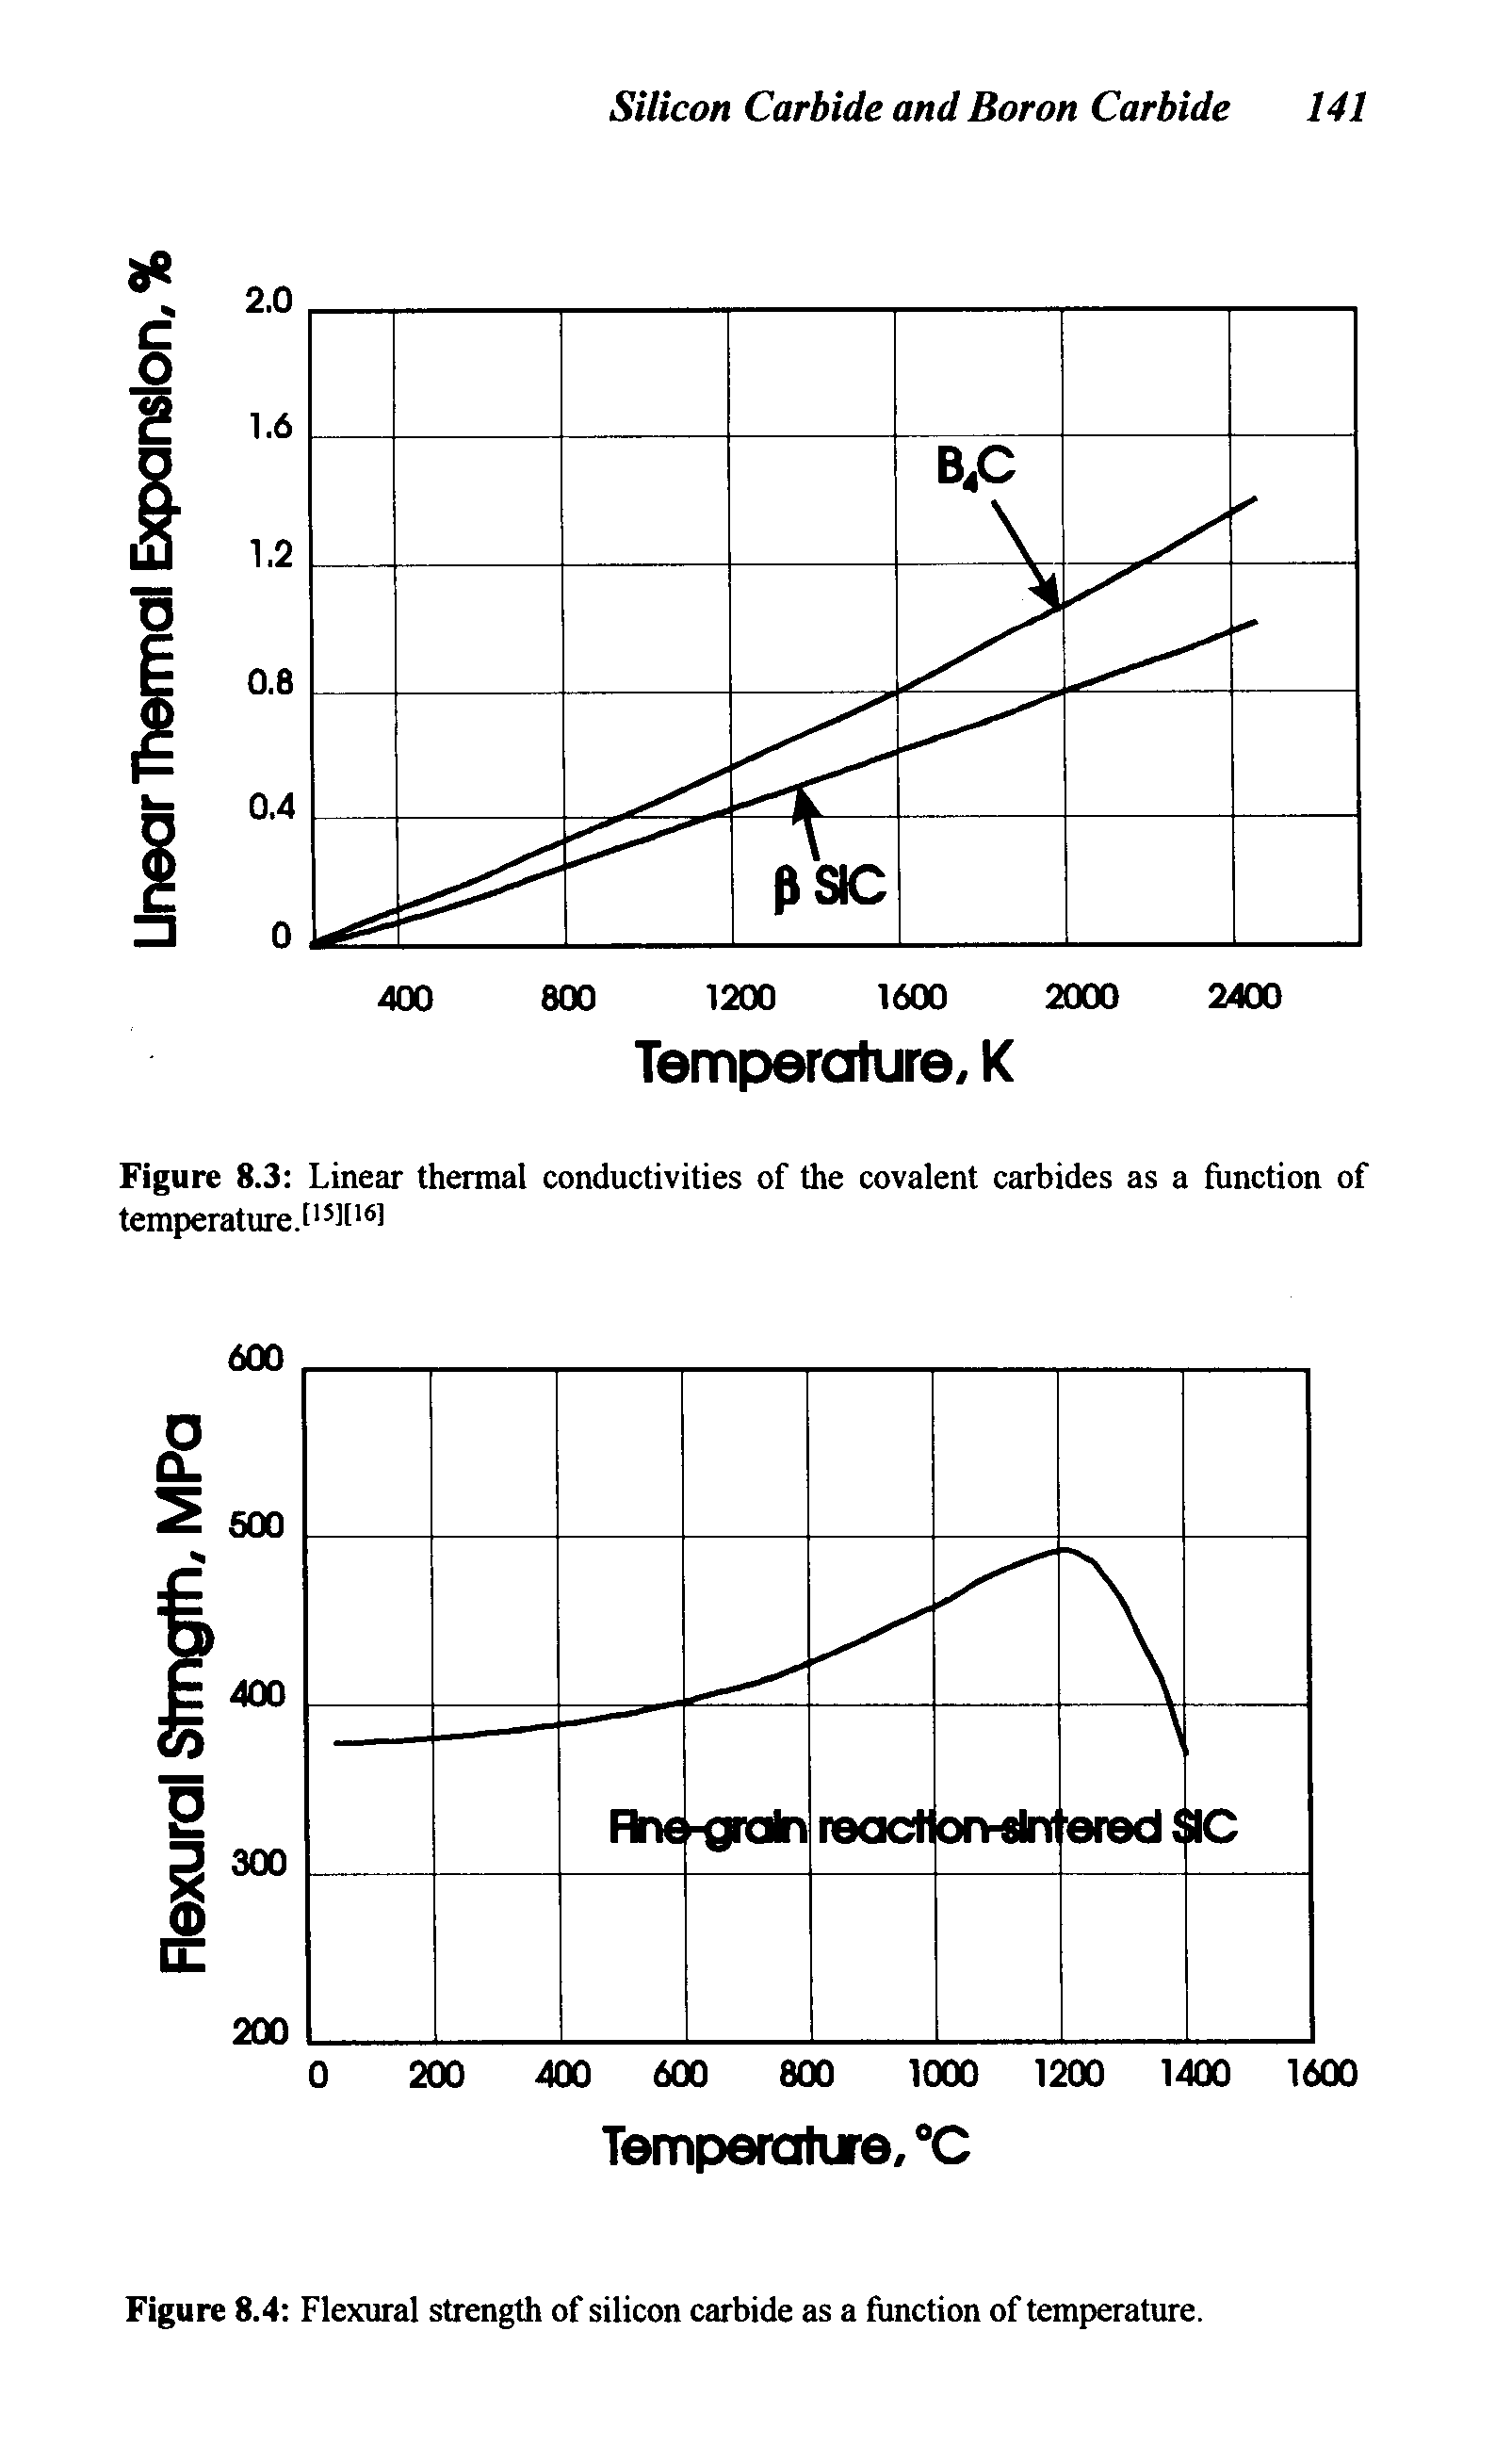 Figure 8.4 Flexural strength of silicon carbide as a function of temperature.